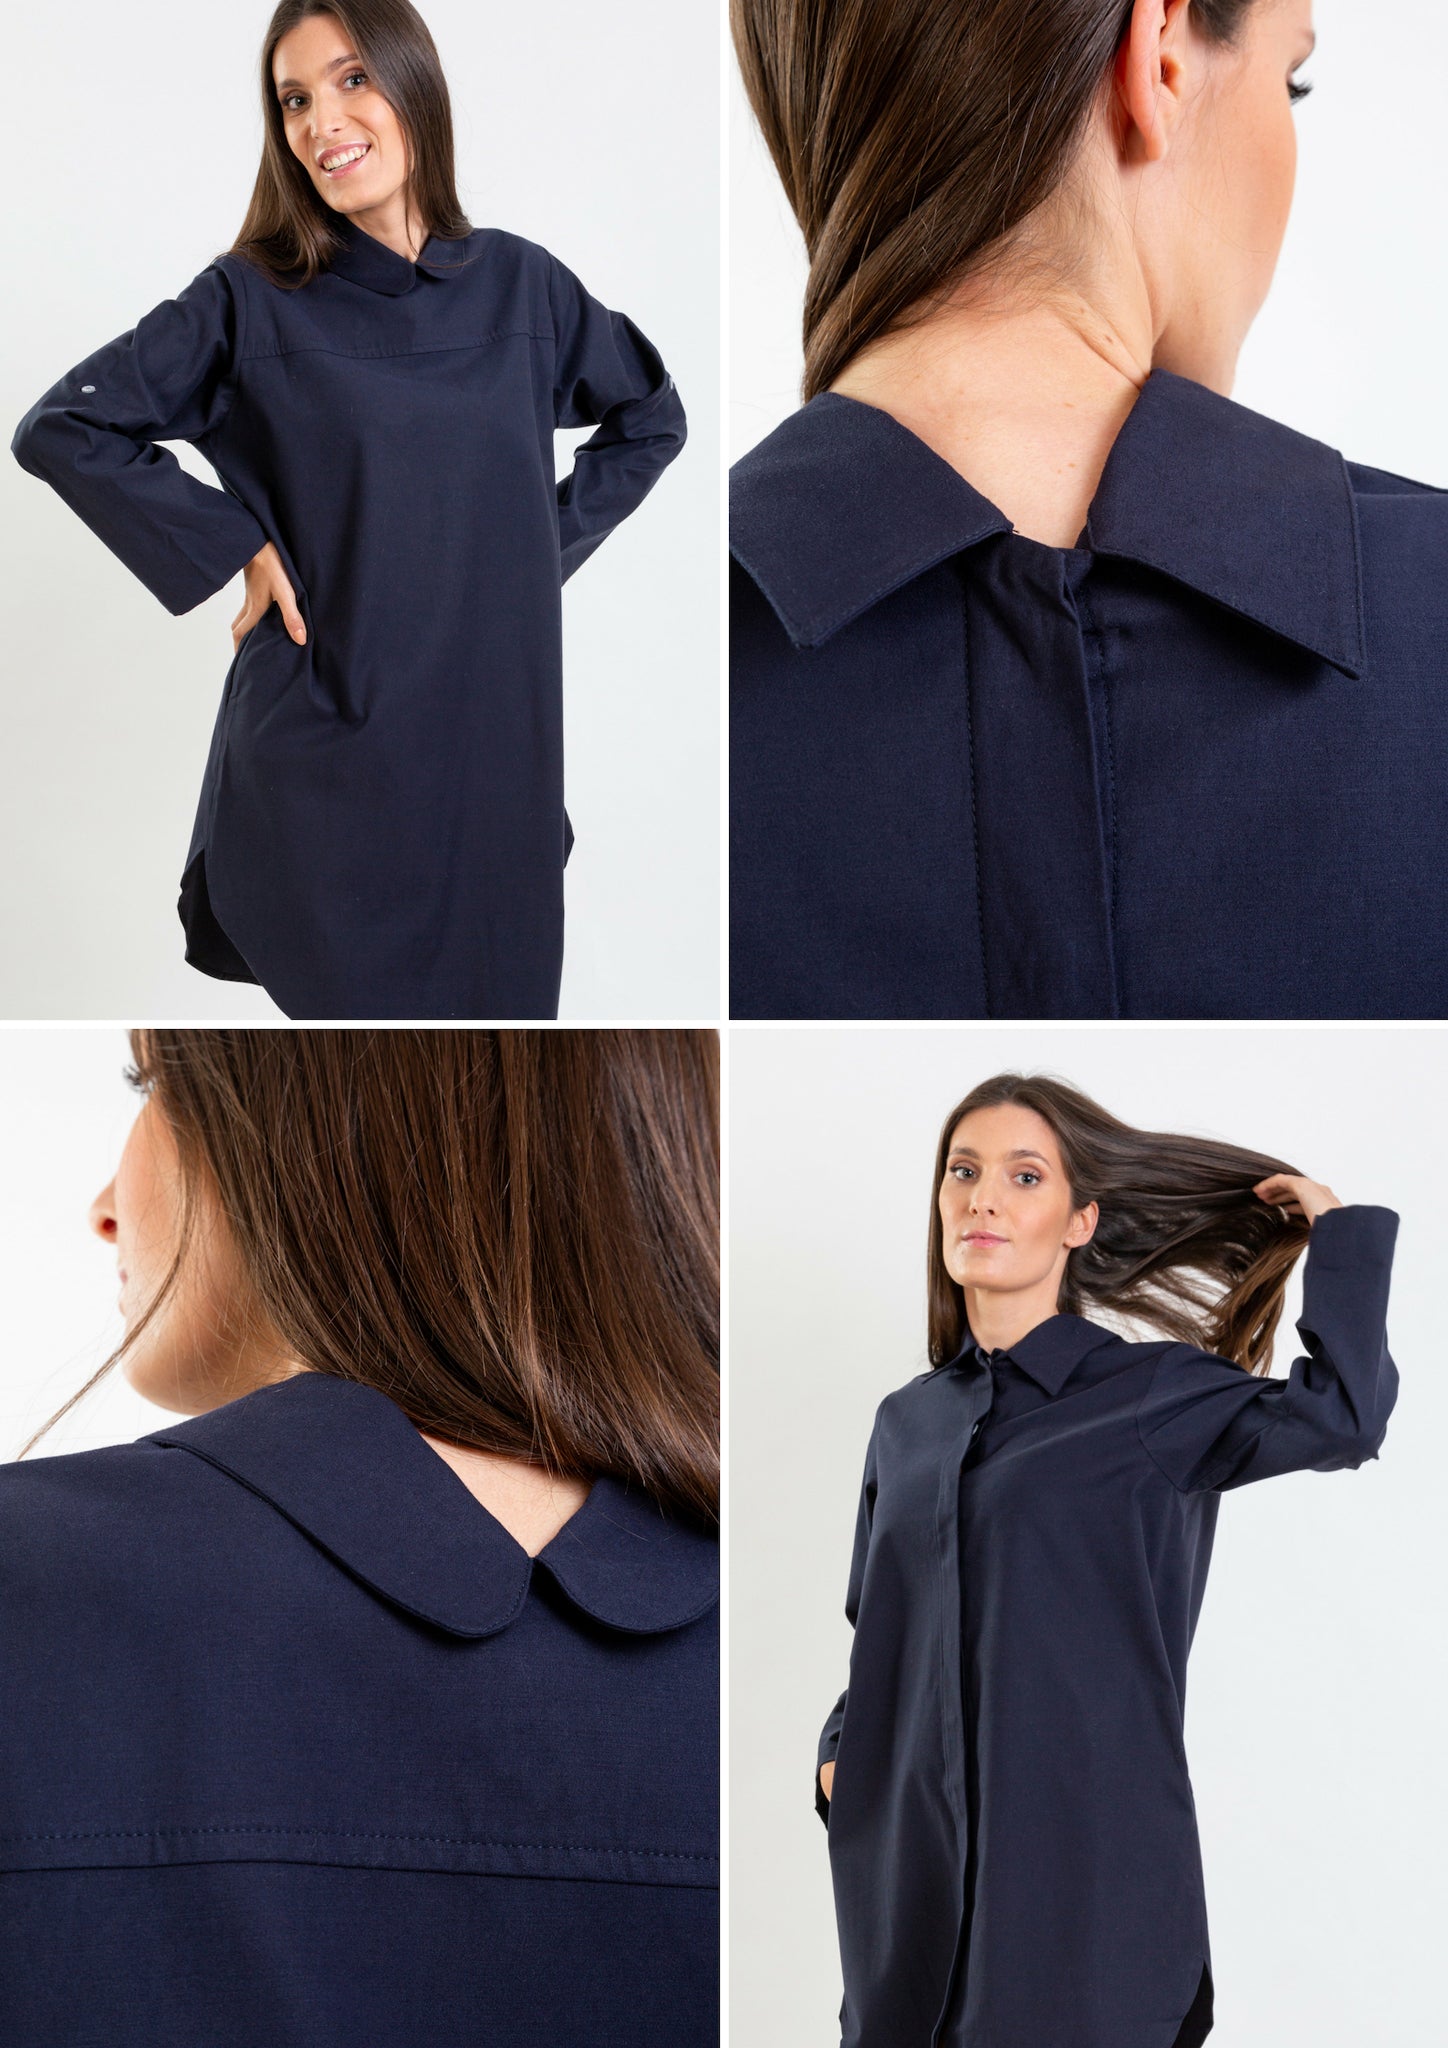 Multifunctional navy shirt whic can be worn as  a long shirt, dress or tunic.